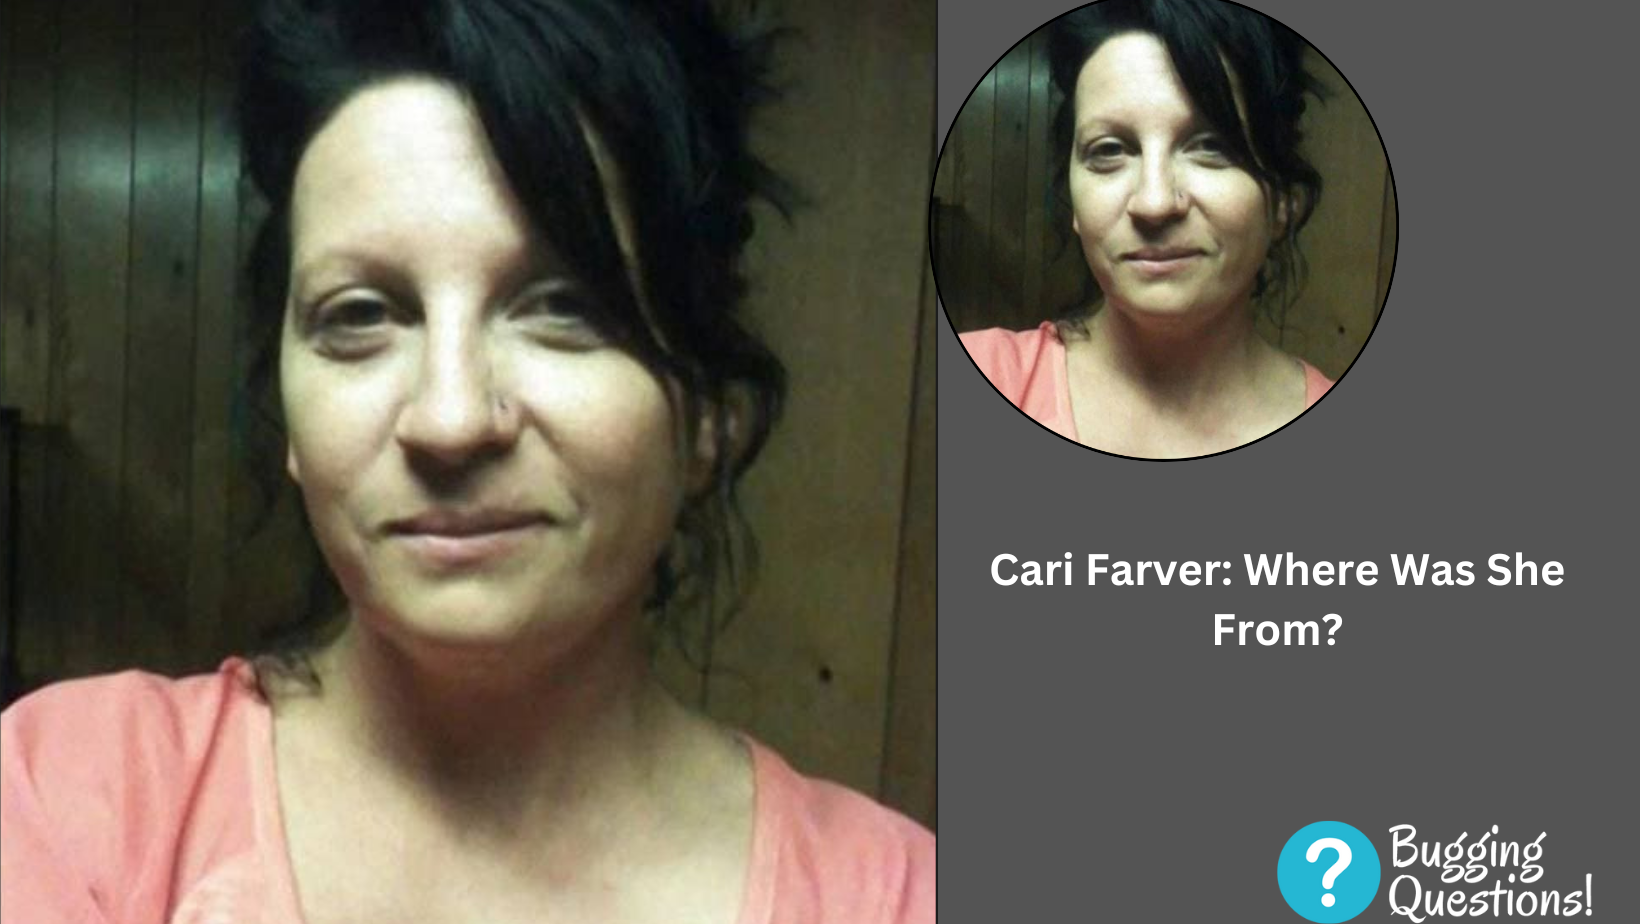 Cari Farver: Where Was She From?